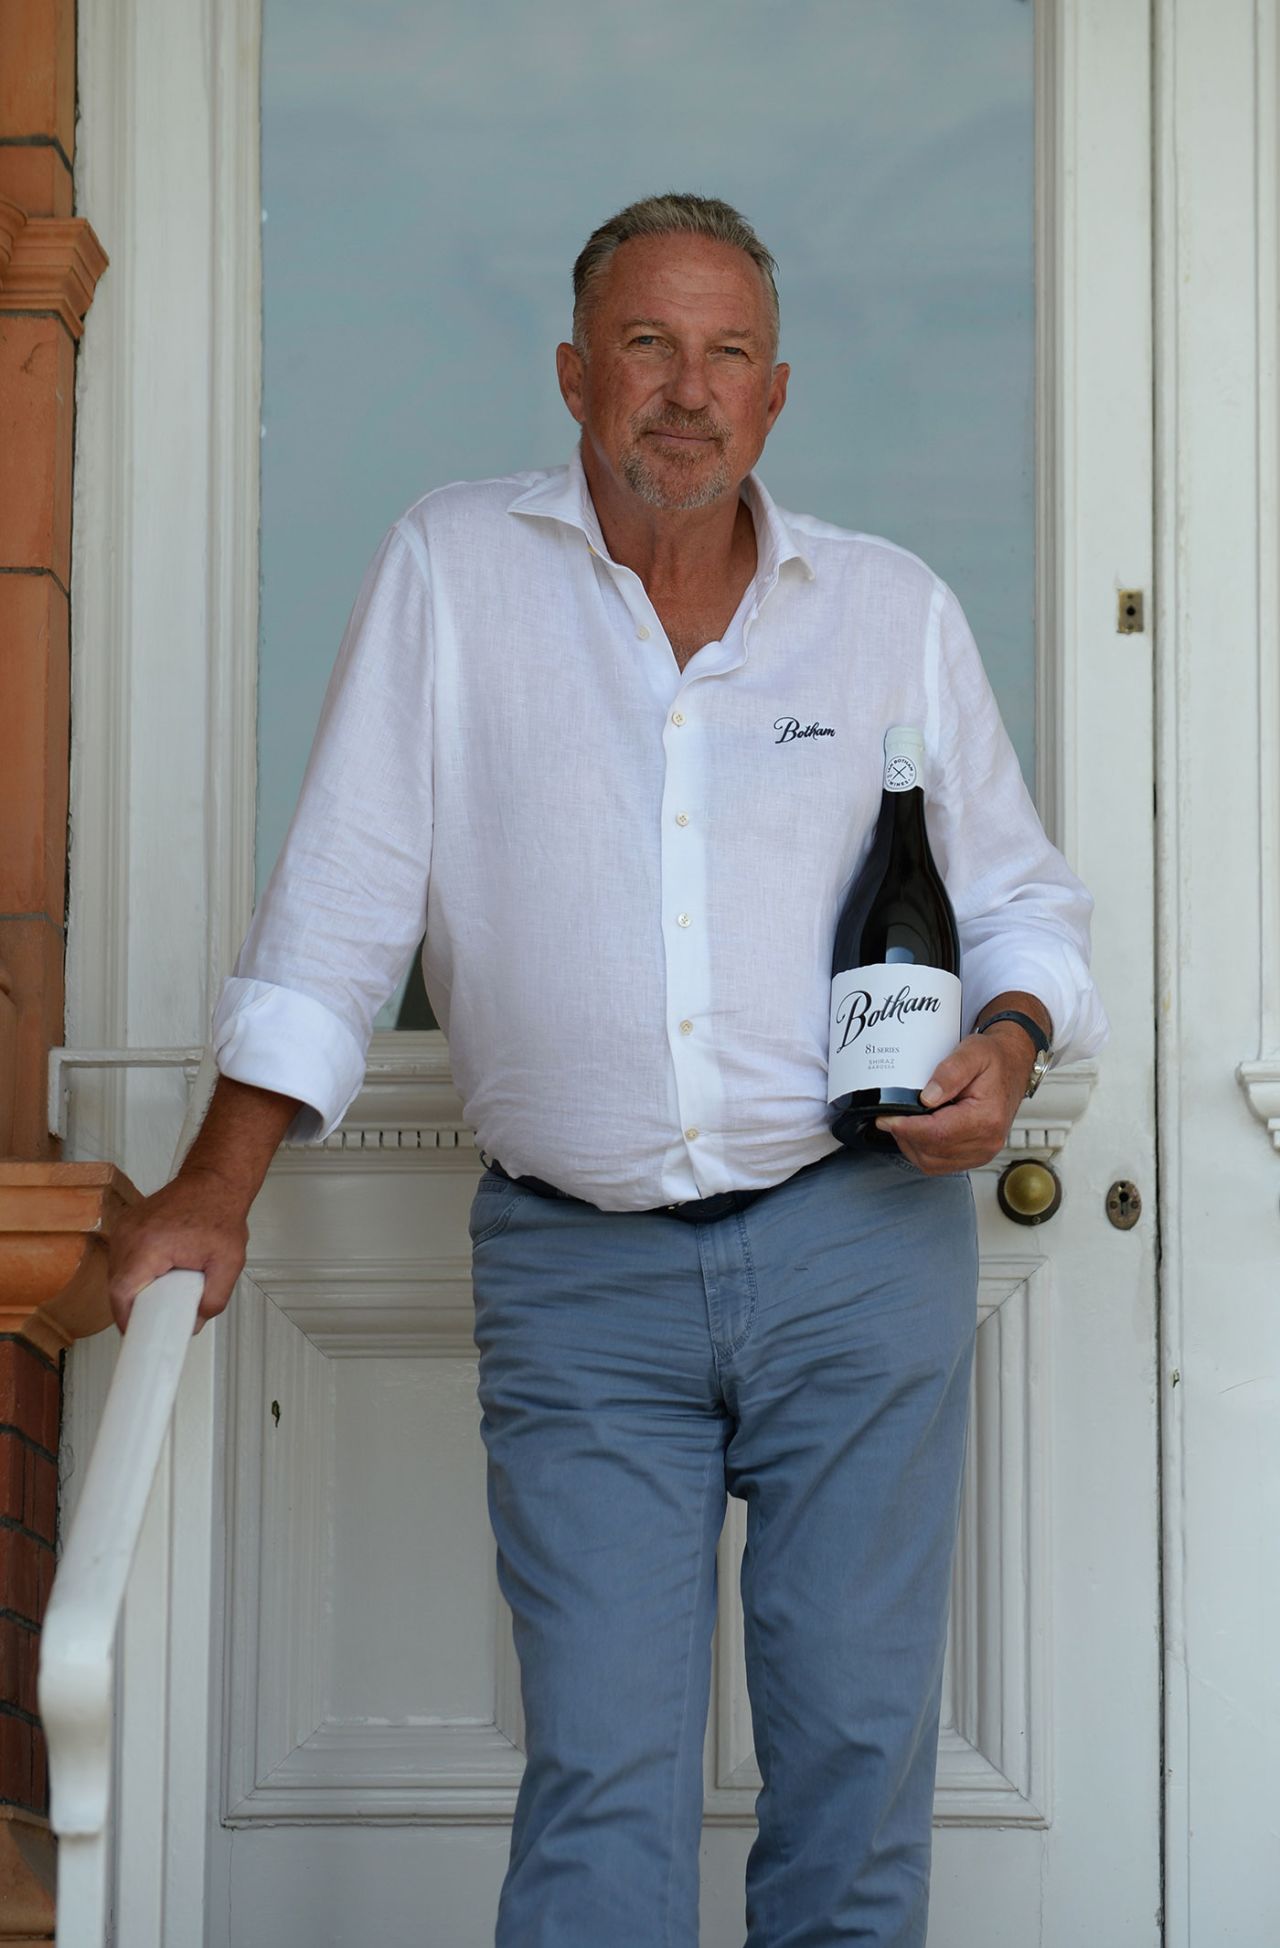 Sir Ian Botham at the launch of Botham Wines, Lord's, July 27, 2018